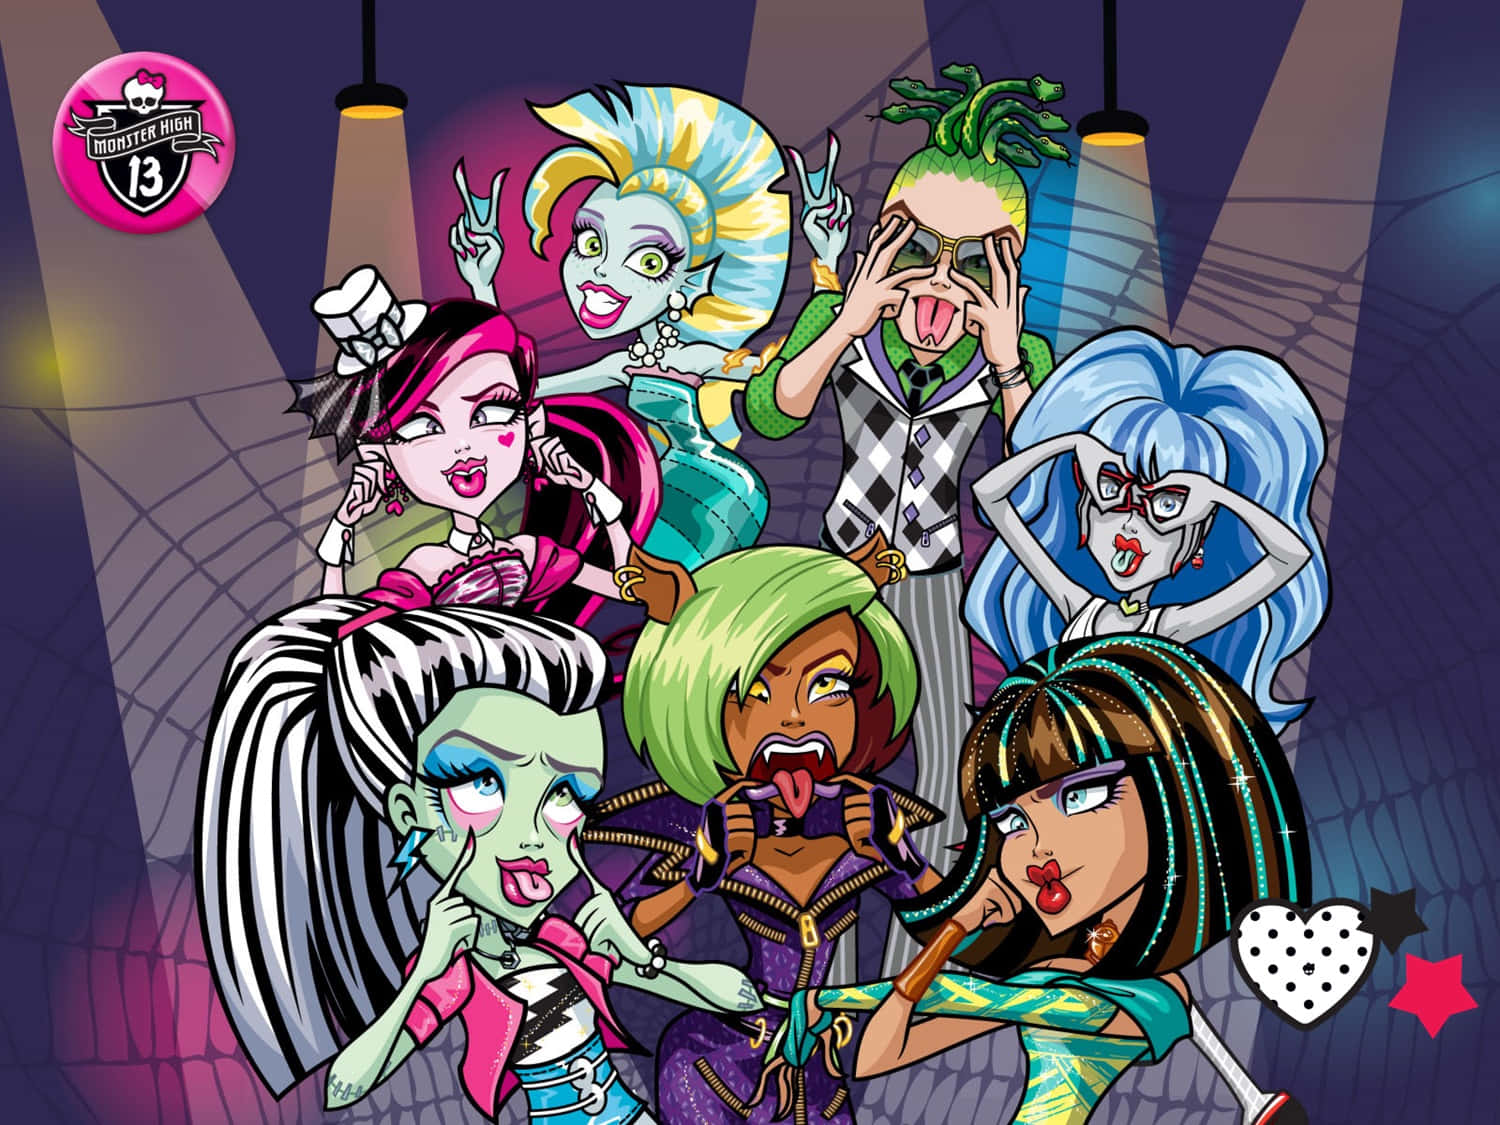 Bite Into The Frighteningly Fun World Of Monster High